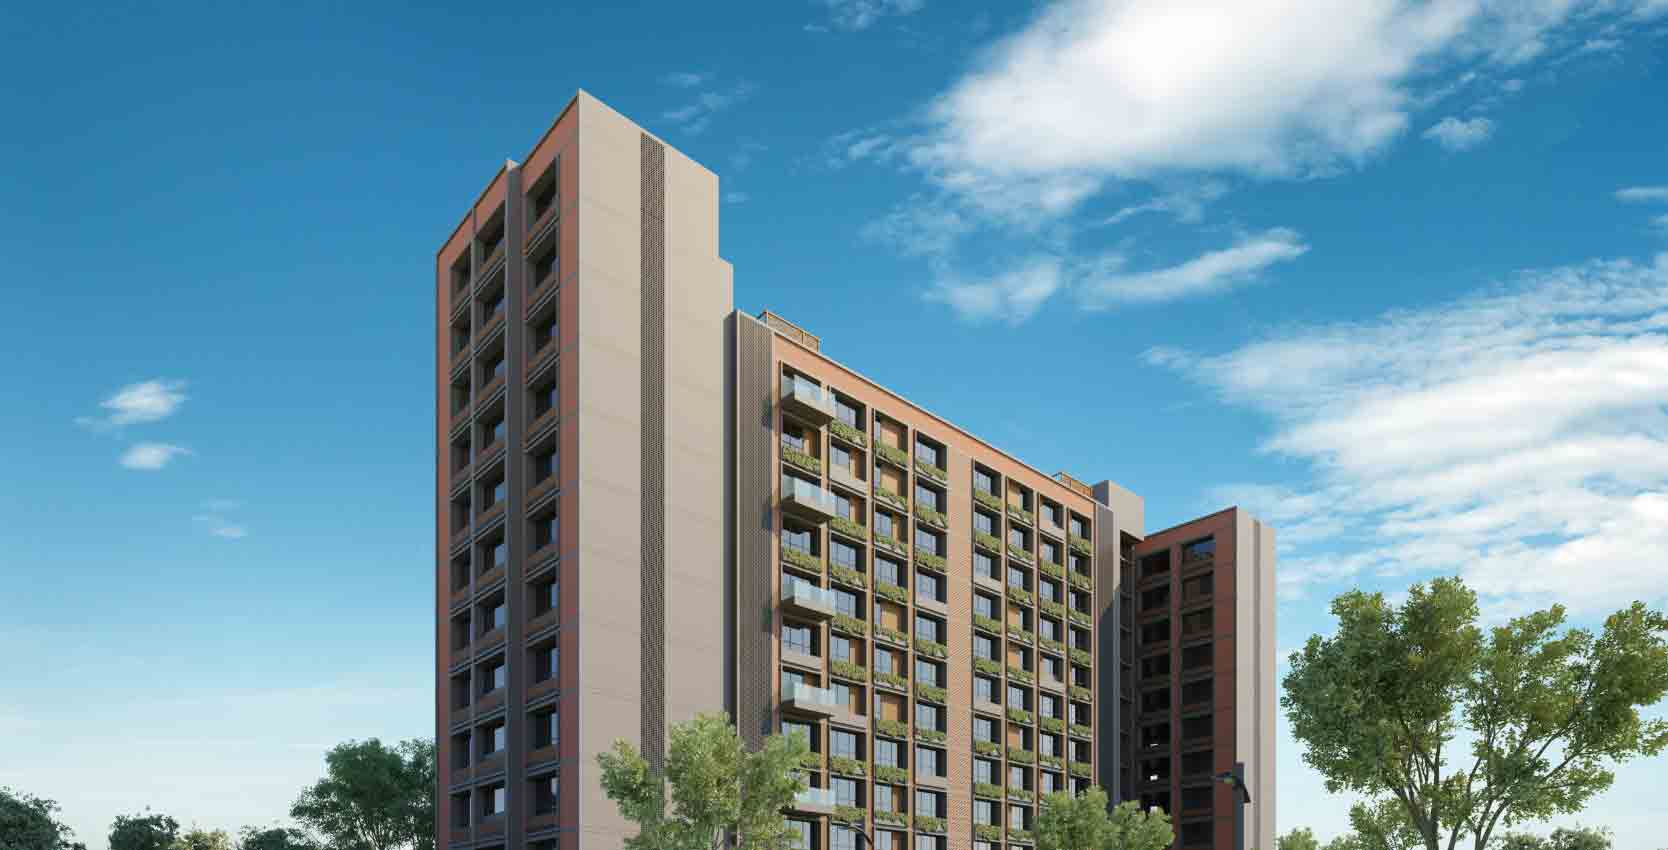 Zion Windfield 3 4 bhk appartments